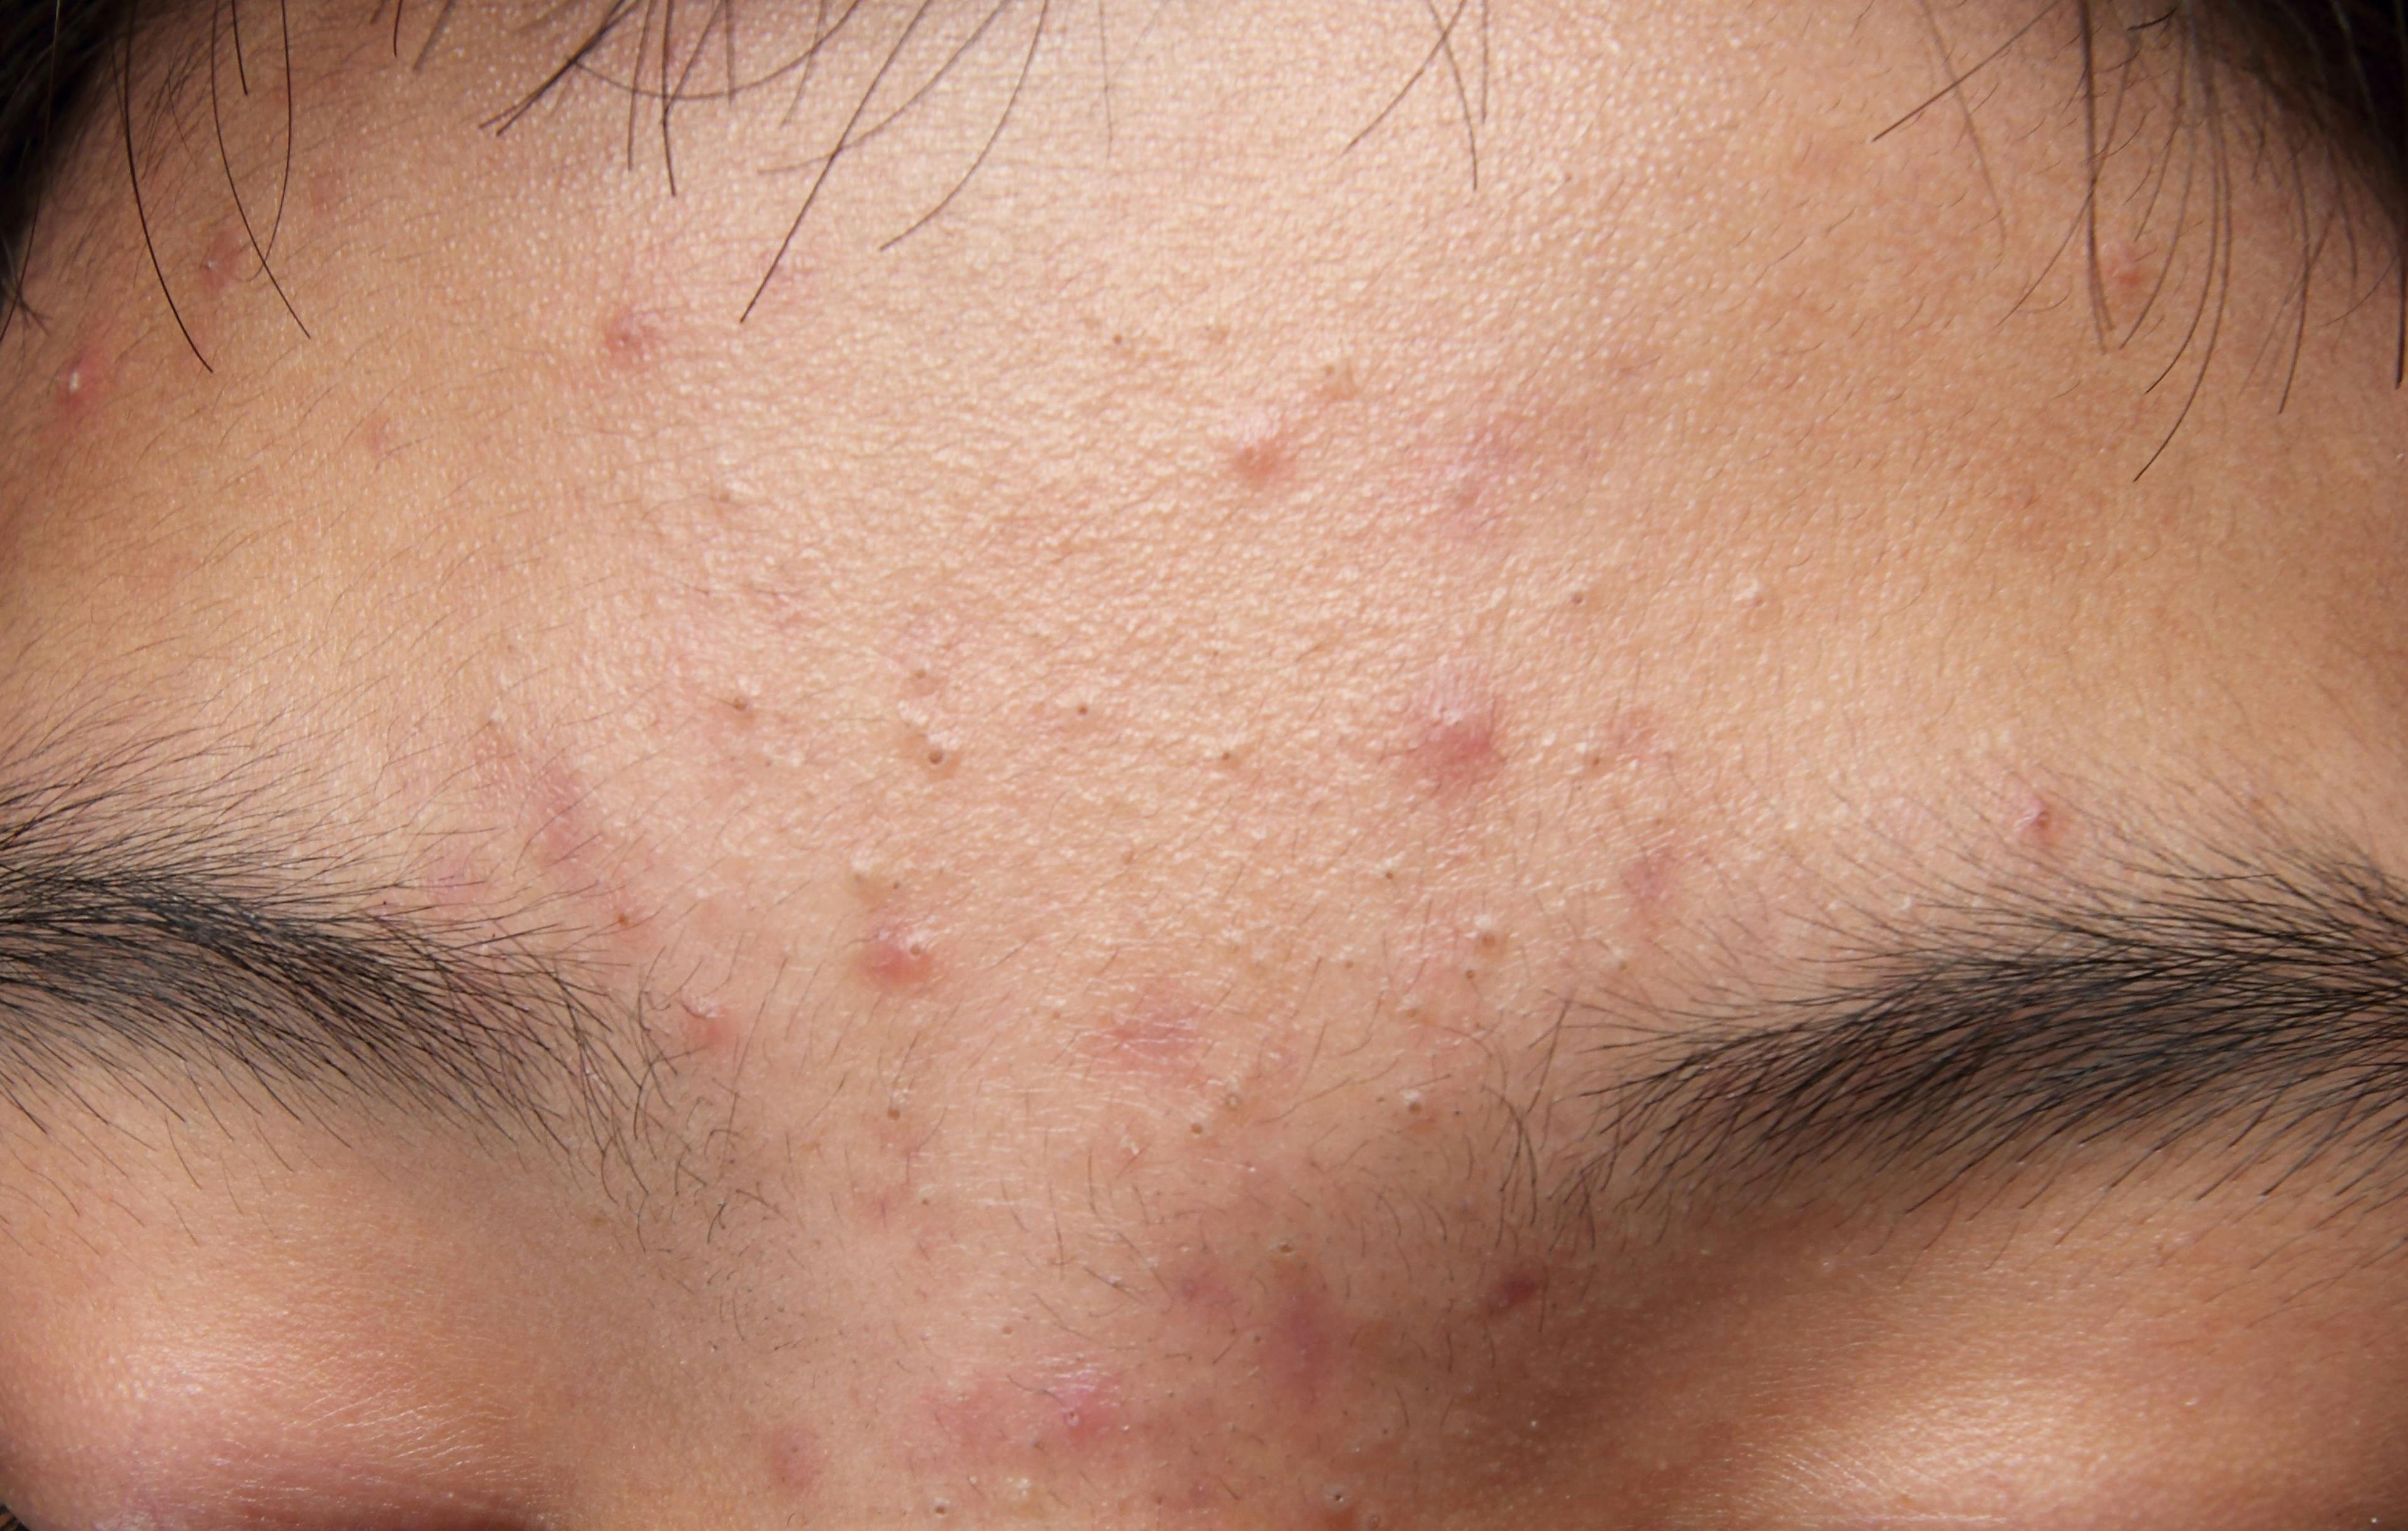 Bacterial Resistance Risk With Systemic Antibiotic Use for Acne